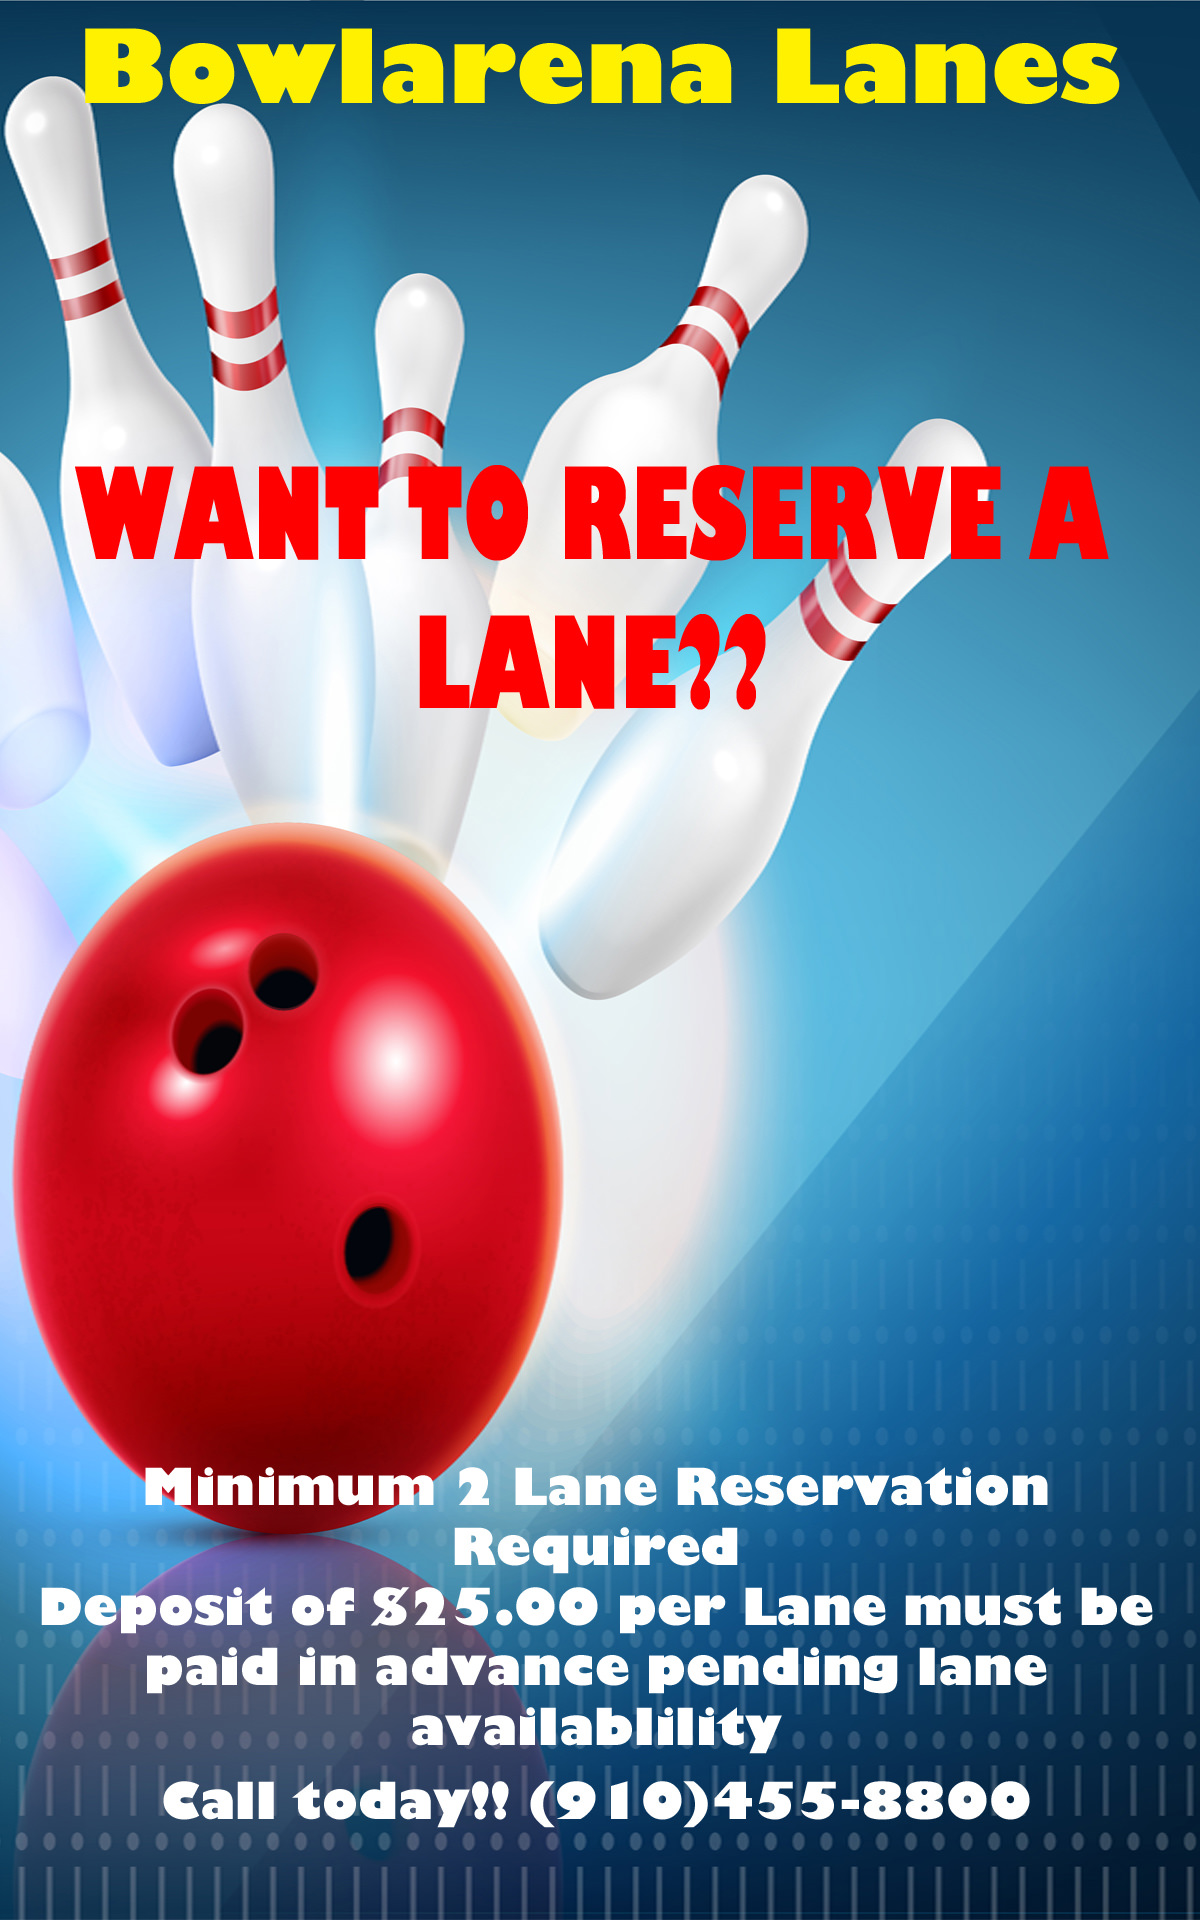 Want to reserve a lane? Minimum 2 Lane Reservation Required. Deposit of $25.00 per lane must be paid in advance pending availability. Call 910-455-8800.